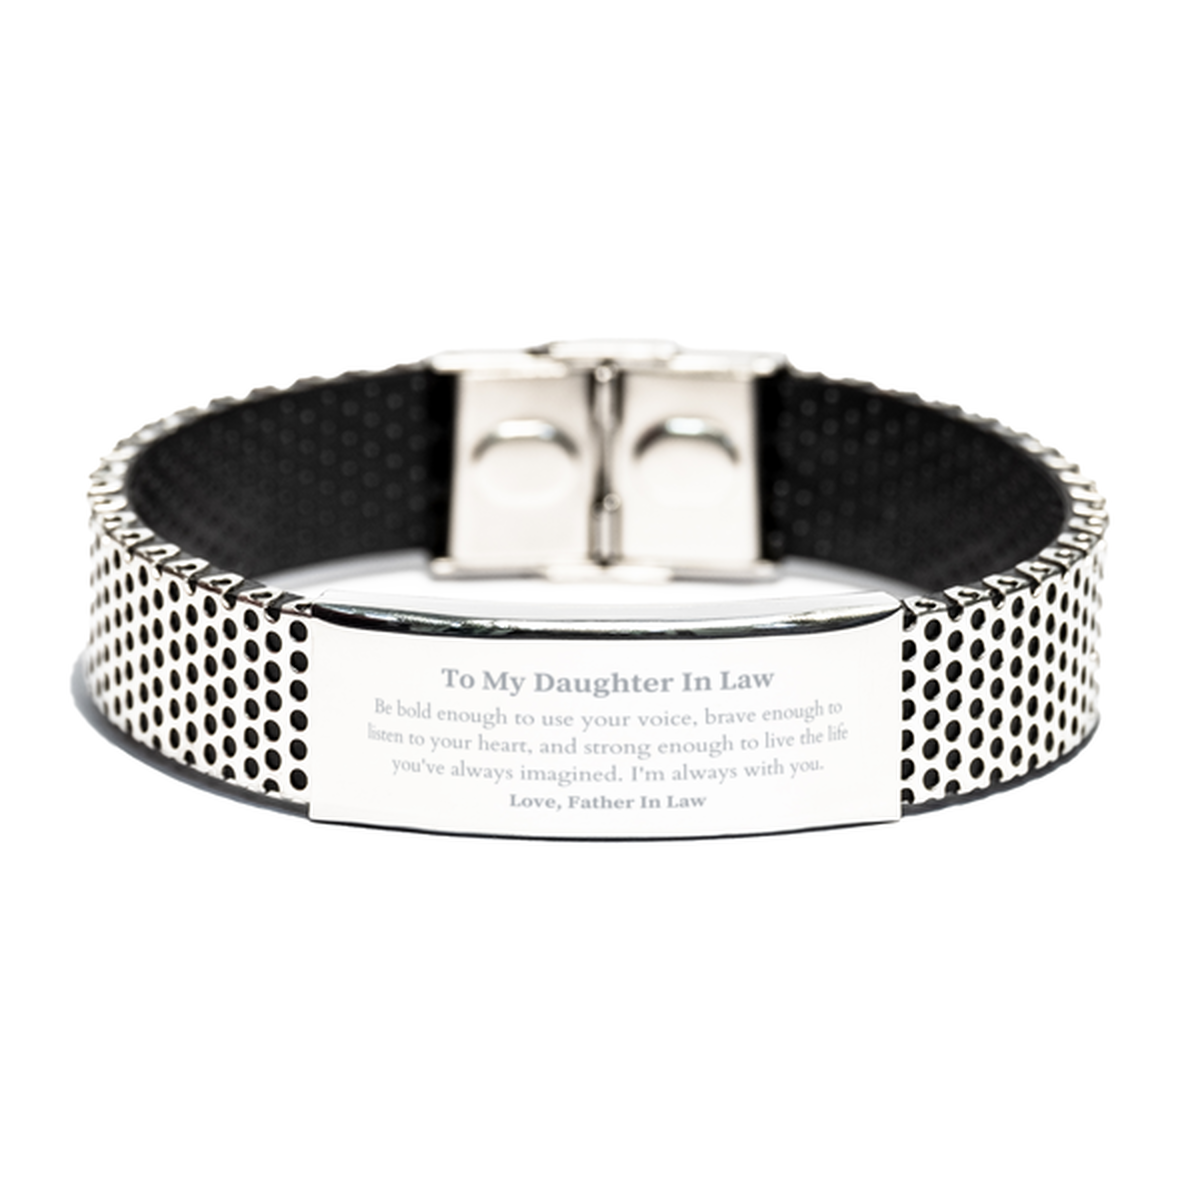 Keepsake Daughter In Law Stainless Steel Bracelet Gift Idea Graduation Christmas Birthday Daughter In Law from Father In Law, Daughter In Law Be bold enough to use your voice, brave enough to listen to your heart. Love, Father In Law